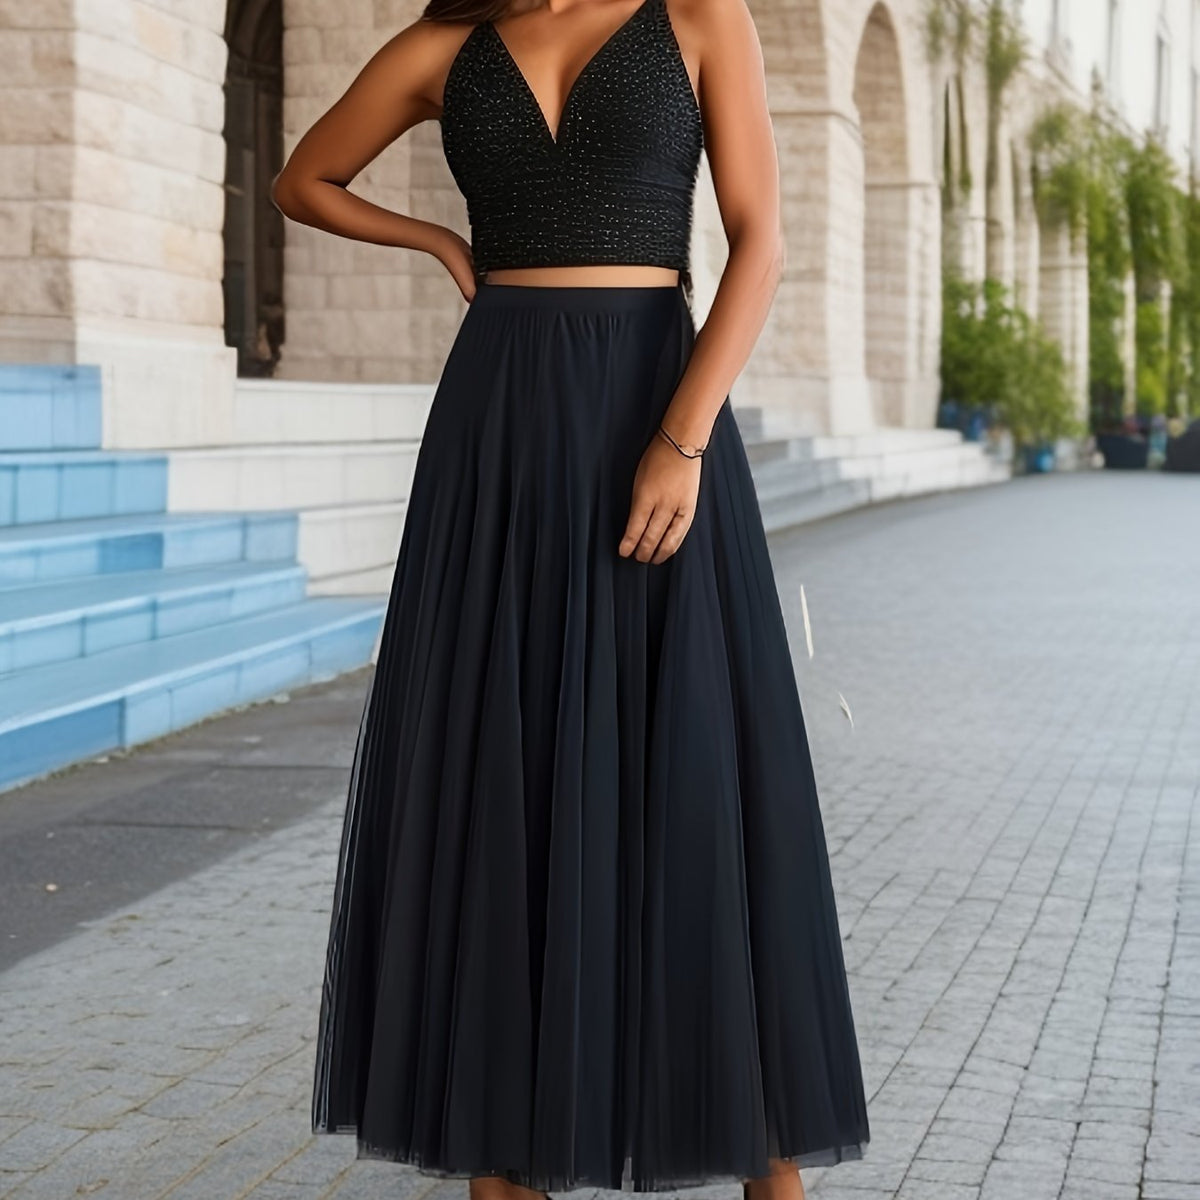 vlovelaw  Solid Pleated Tulle Skirt, Casual Maxi Skirt For Spring & Fall, Women's Clothing